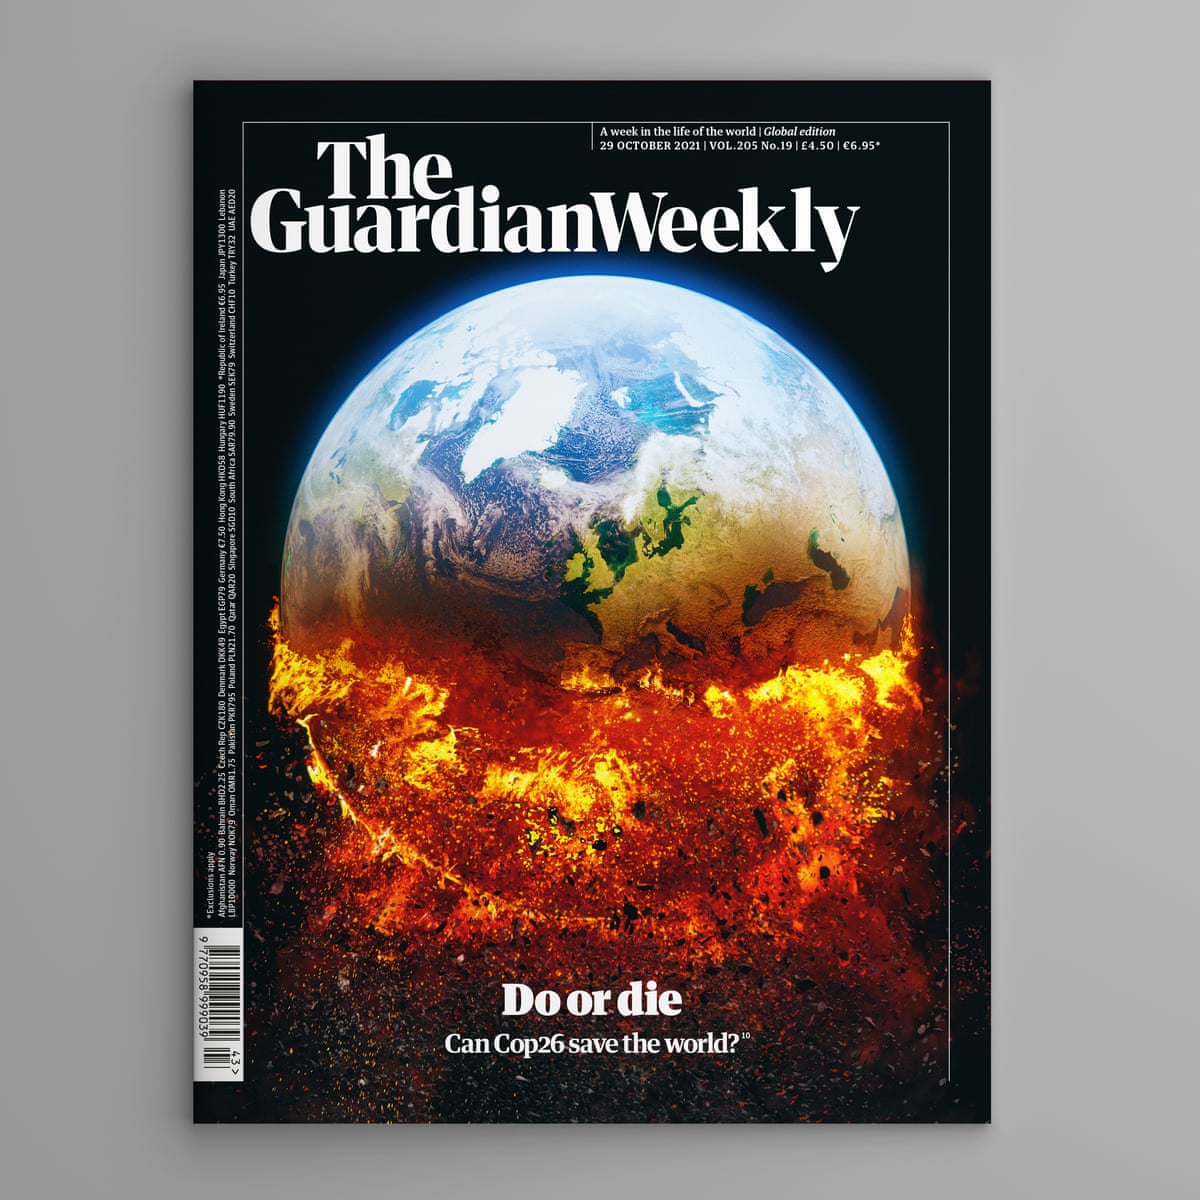 Can Cop26 save the world? Inside the 29 October Guardian Weekly | Cop26 |  The Guardian